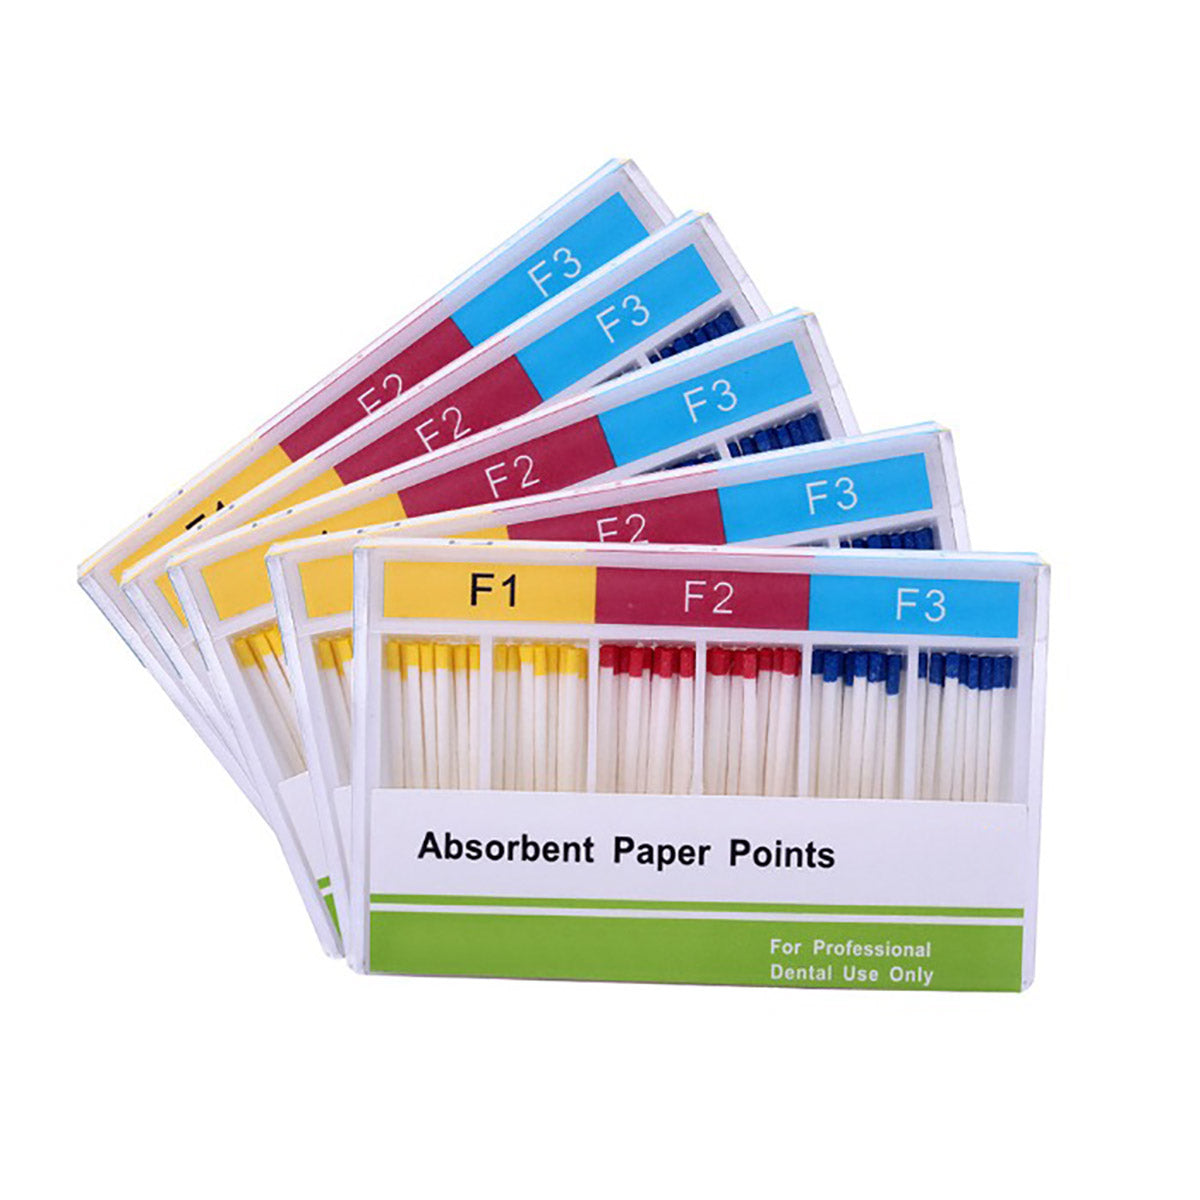 Absorbent Paper Points Assorted F1 F2 F3 100pcs/Pack - pairaydental.com